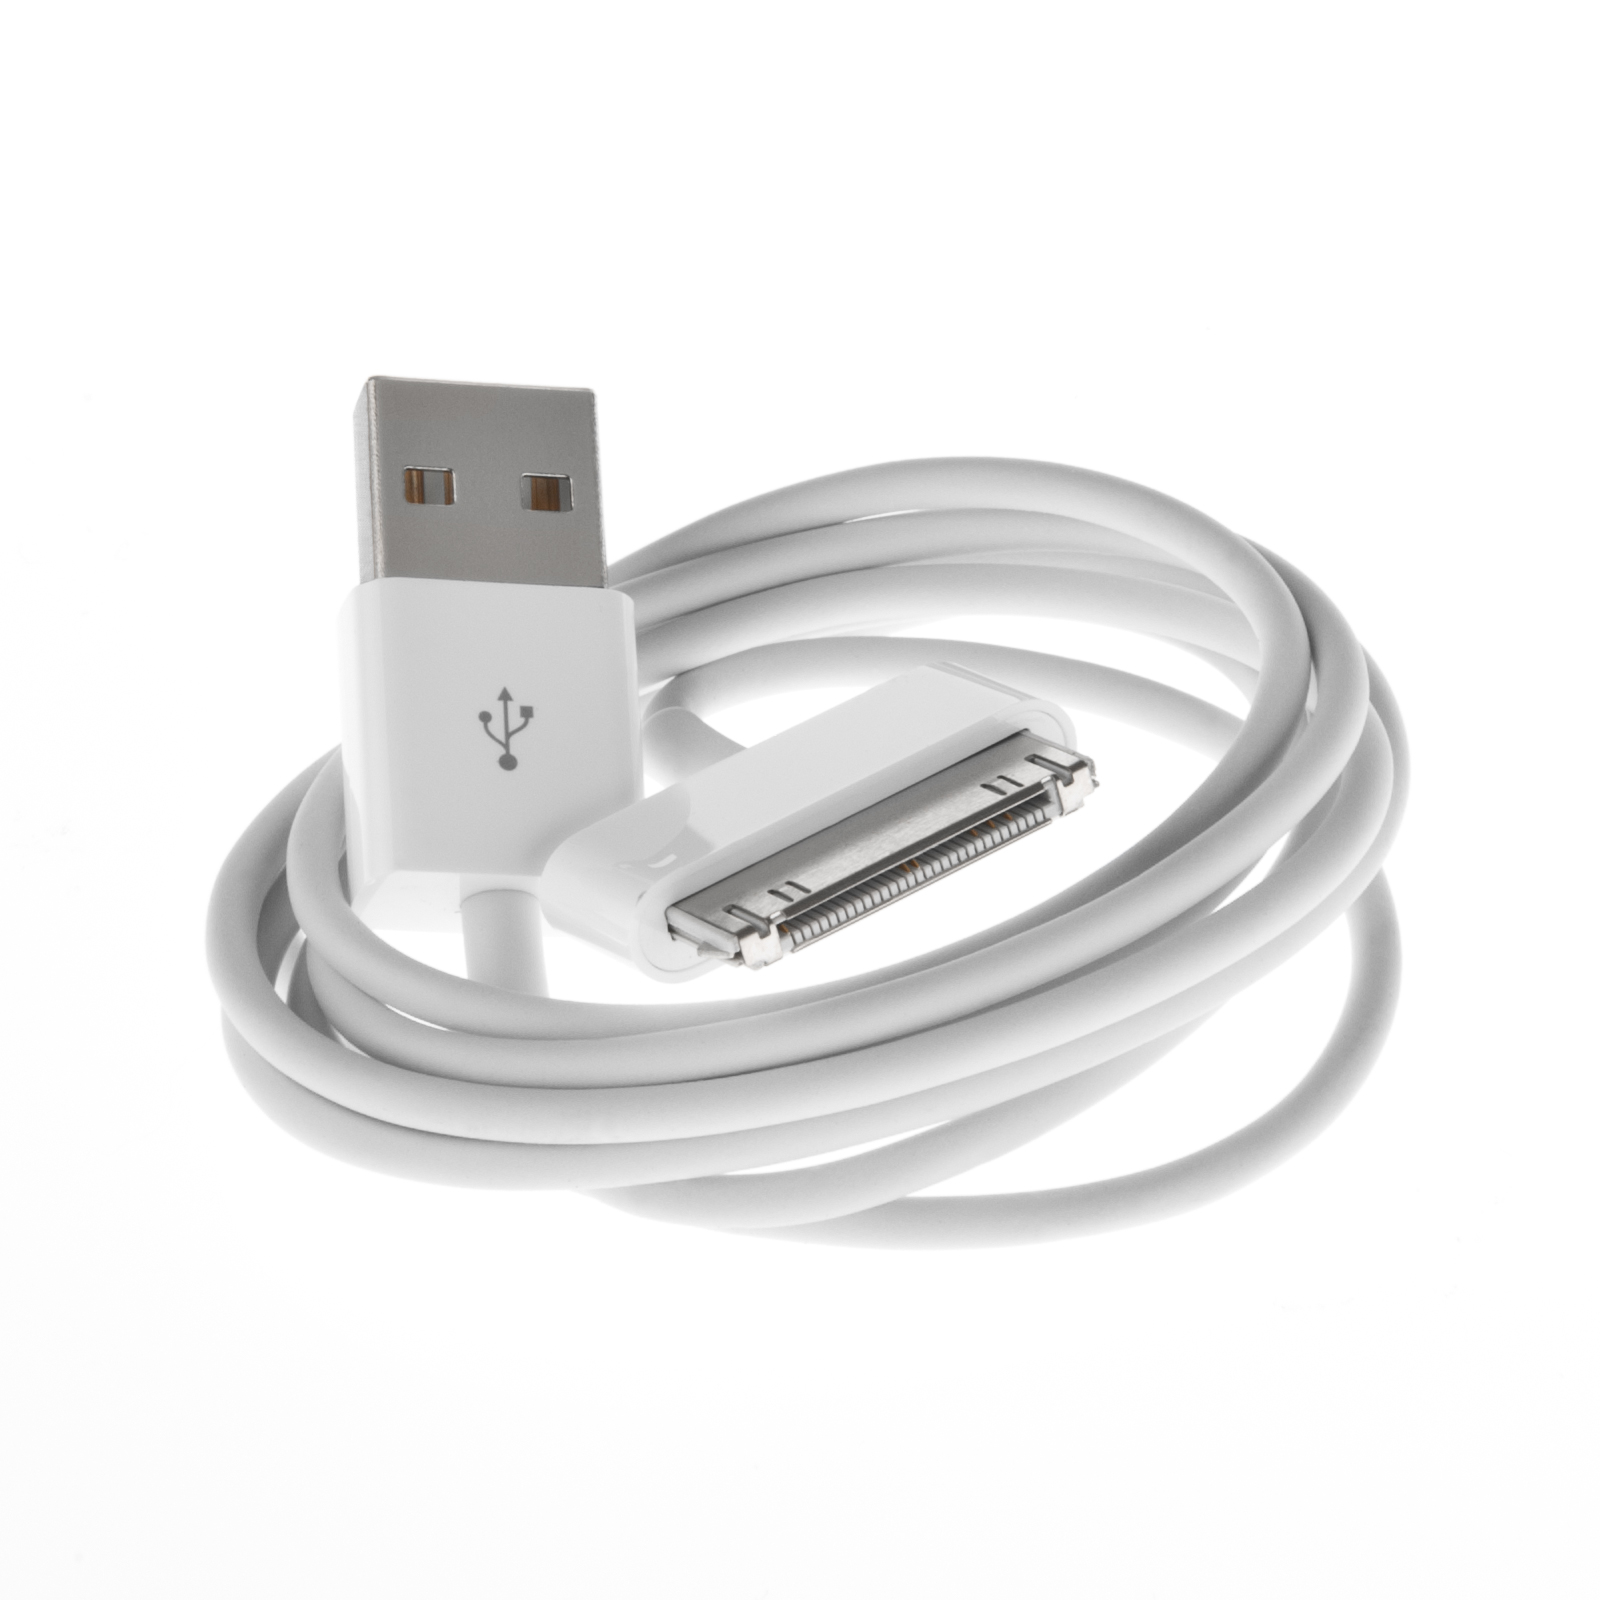 Official Apple 30-pin to USB Cable for iPhone 3G/3Gs, iPhone 4/4S